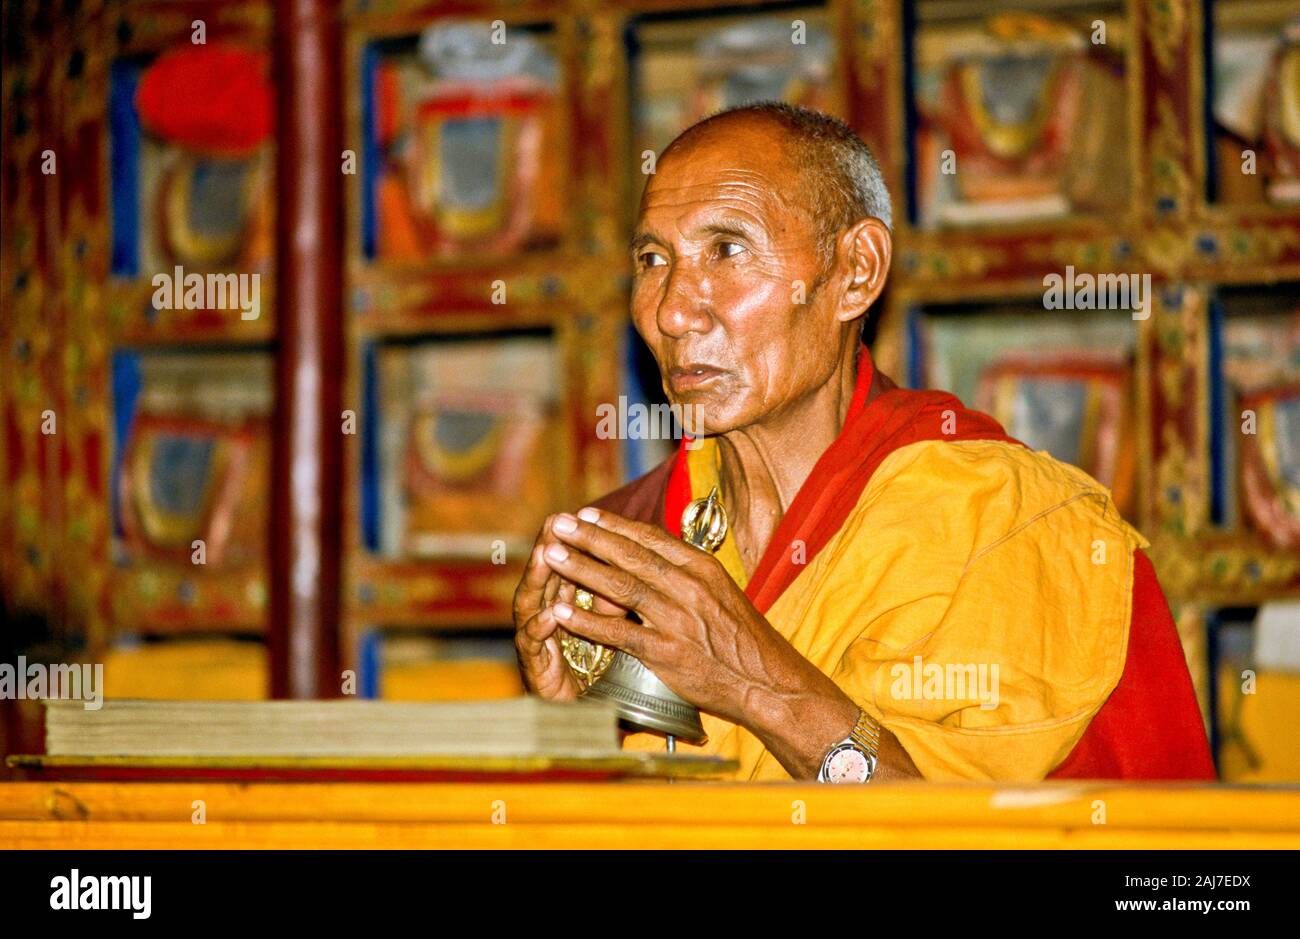 buddhist monk praying in front of the libary Stock Photo